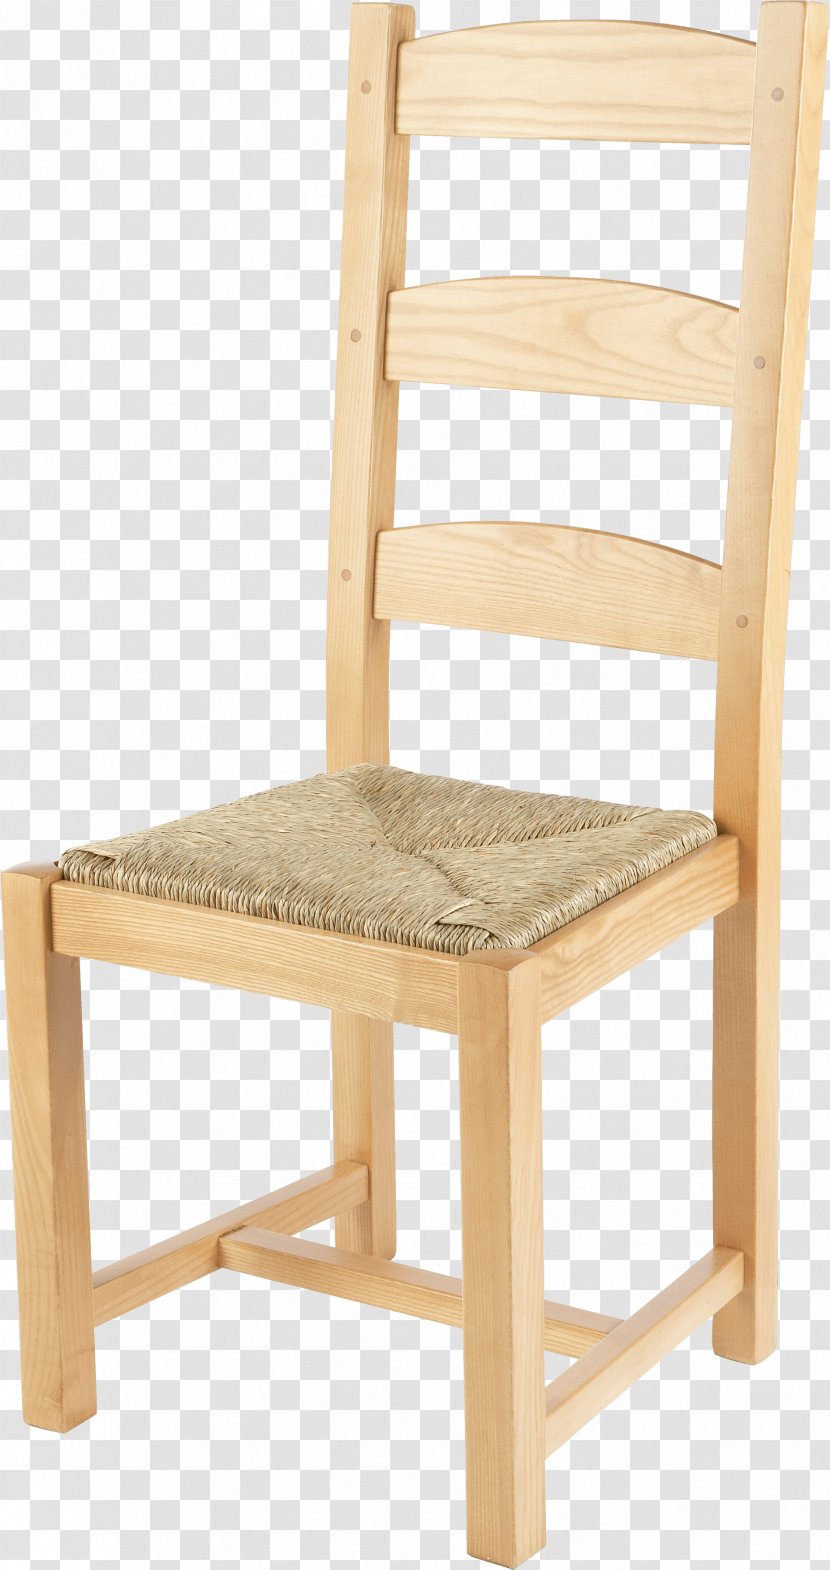 Table Chair Furniture - Garden - Image Transparent PNG